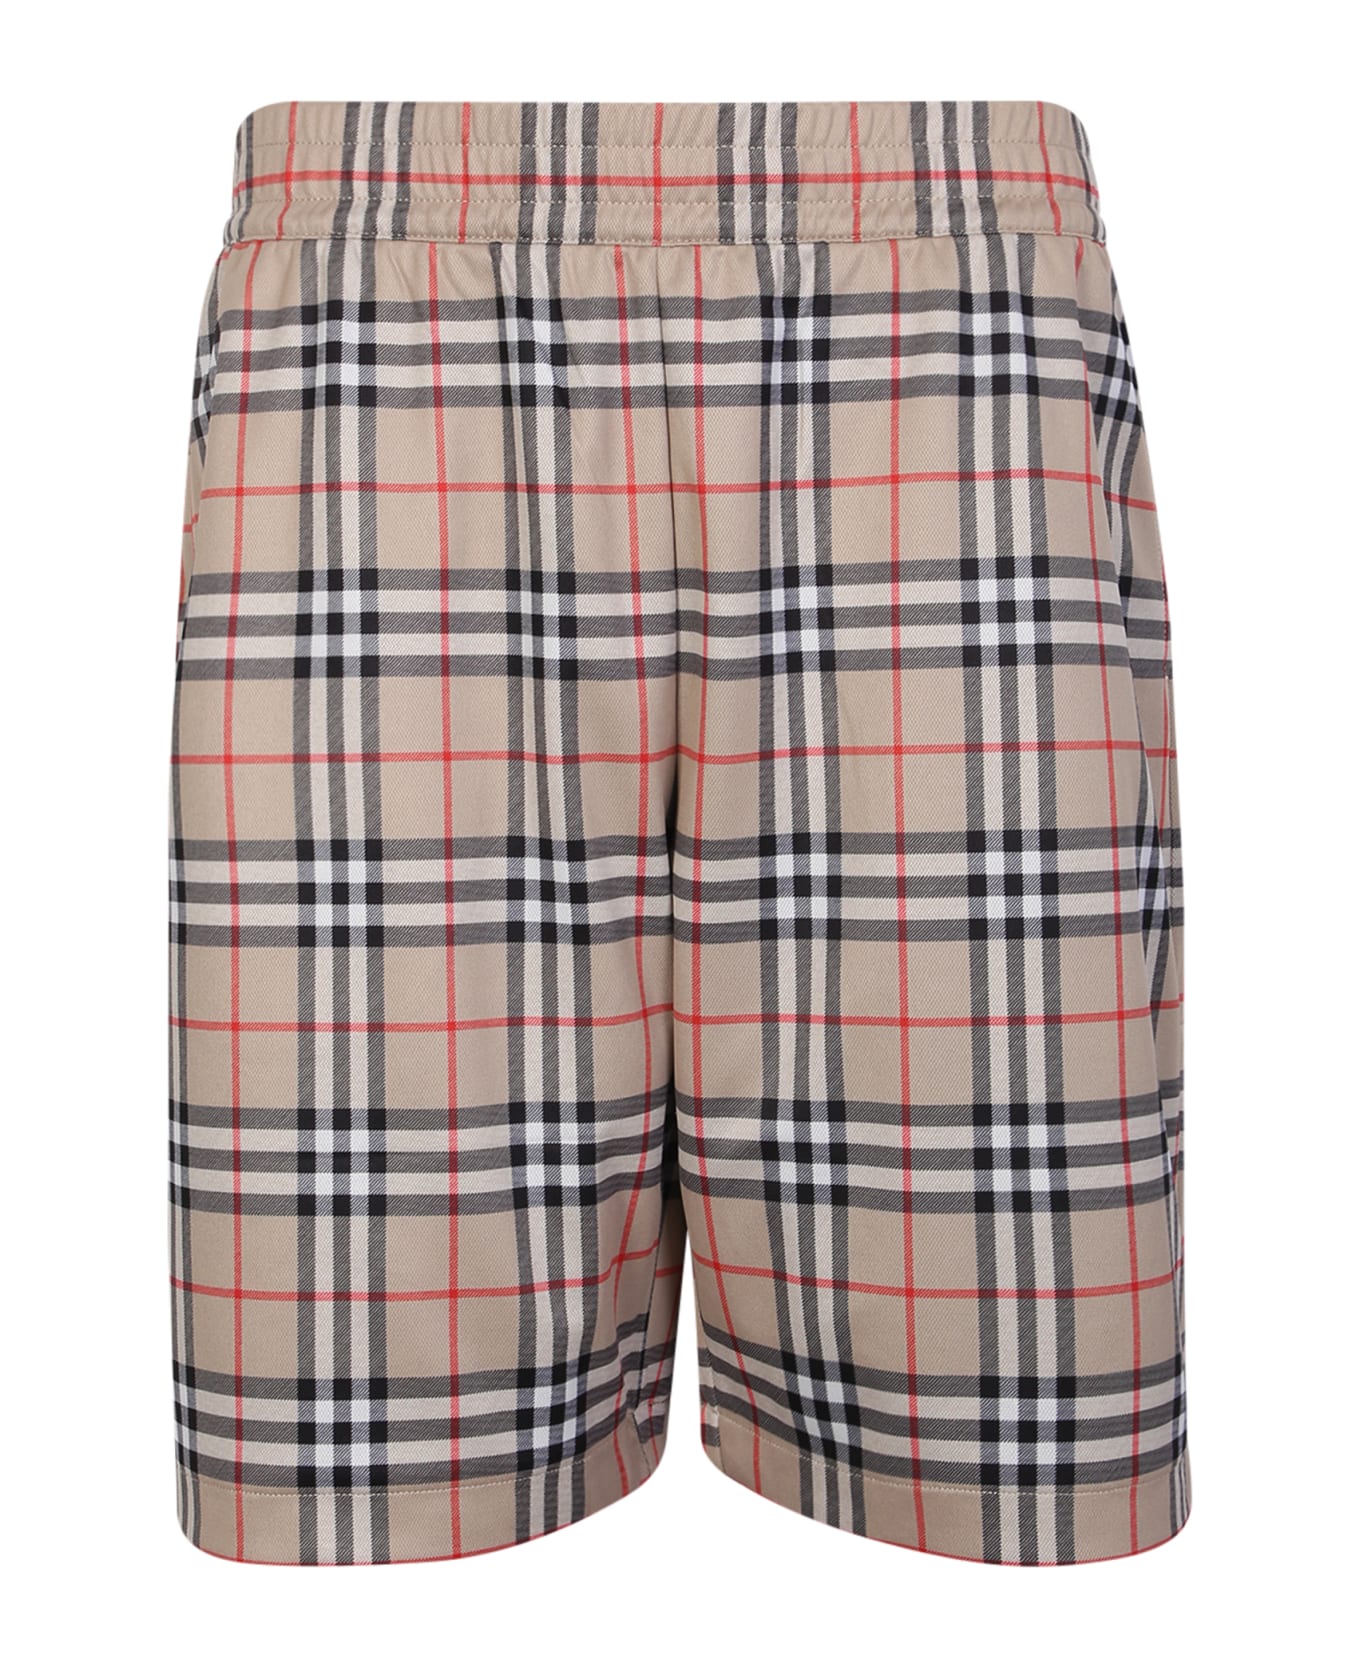 Burberry Check Shorts - Archive Beige